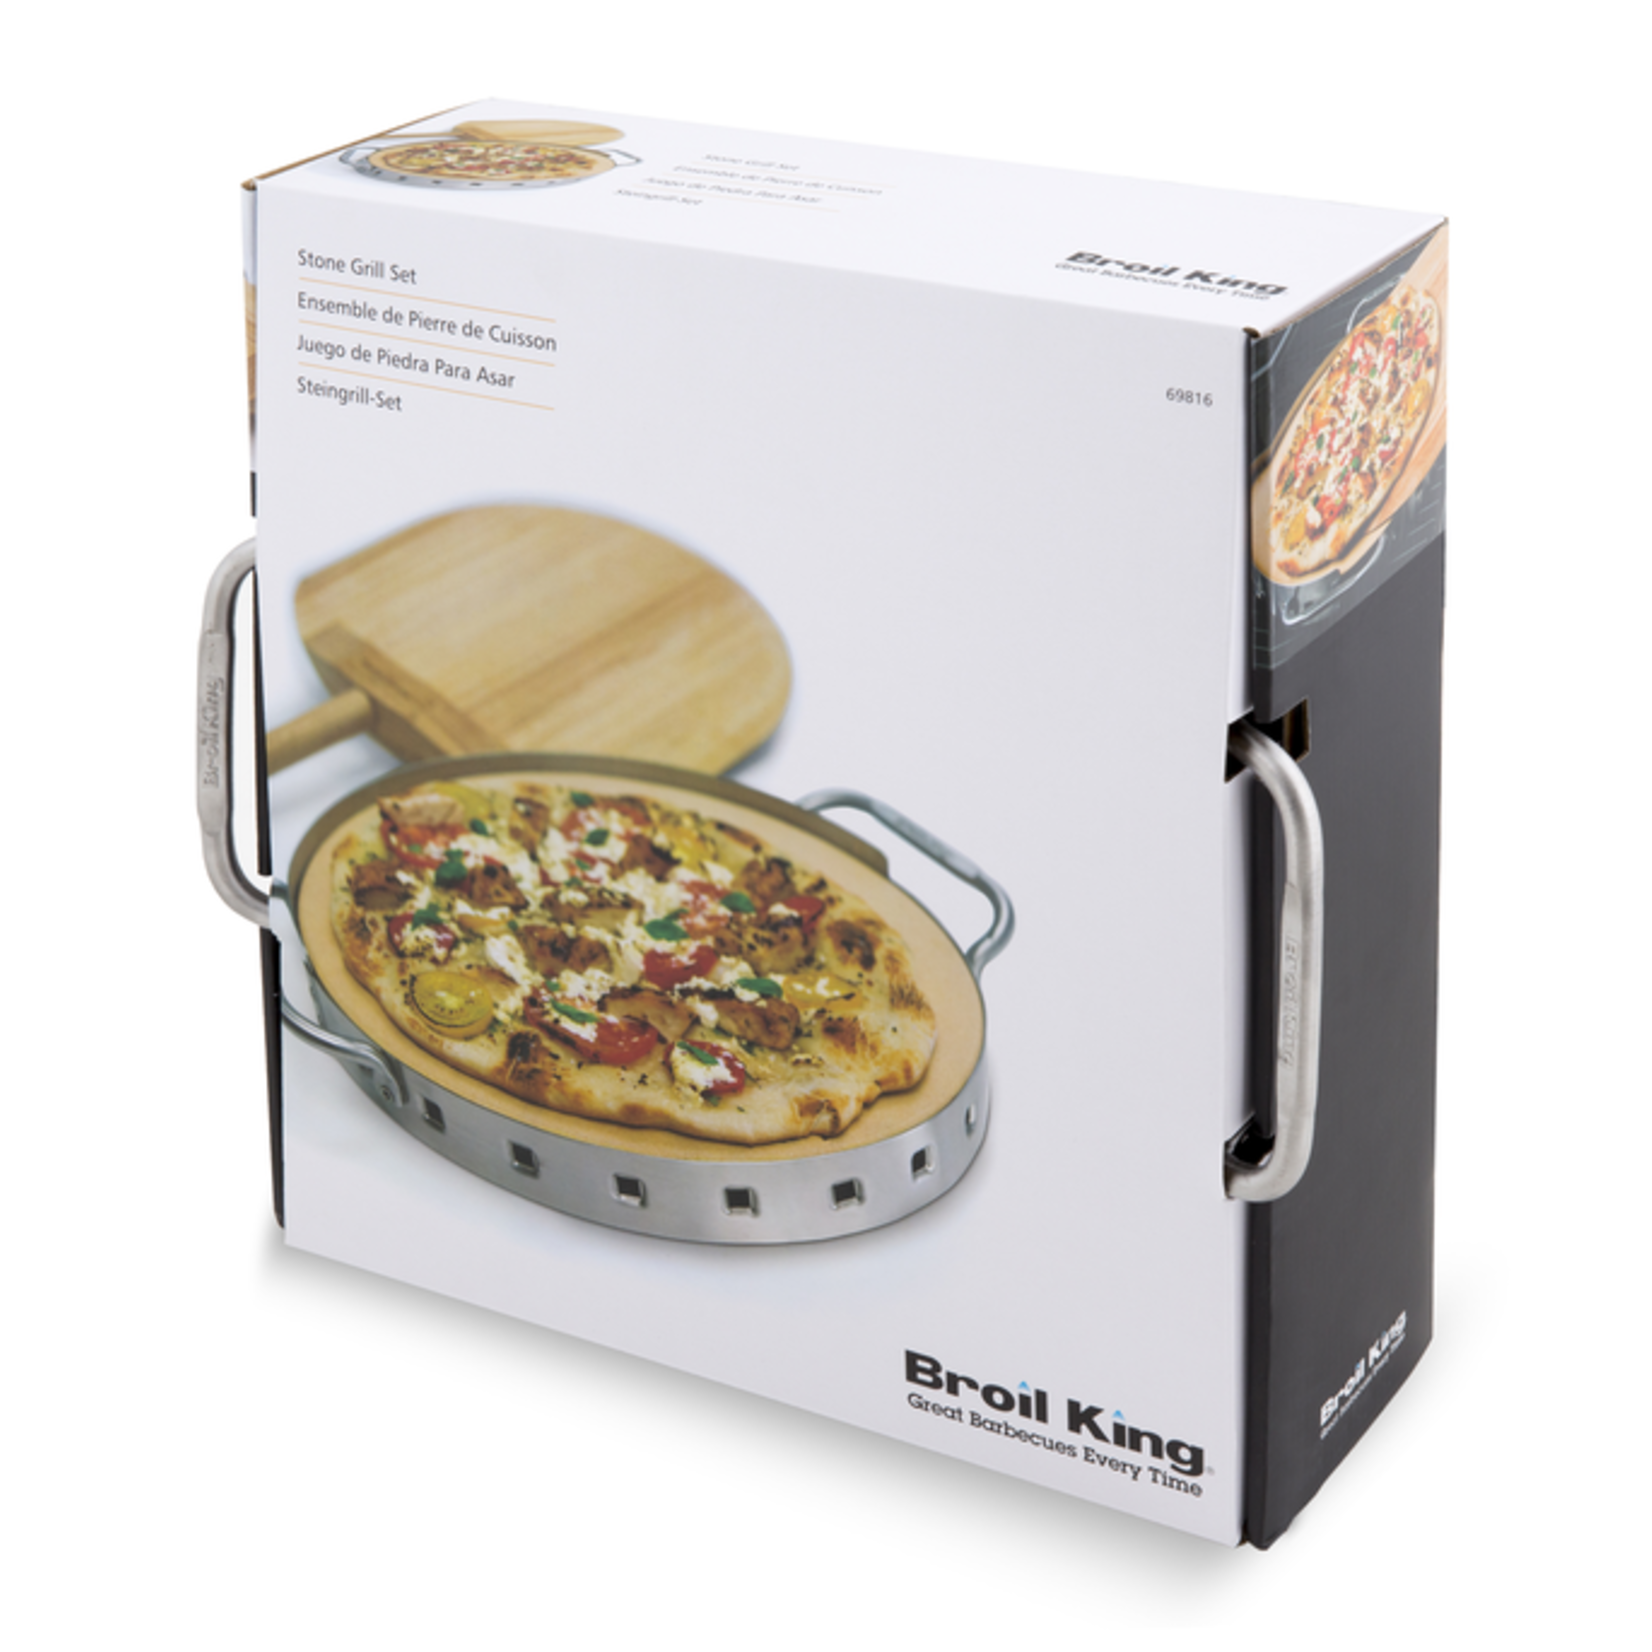 Broil King Pizza Stone - Full Set - Imperial Series